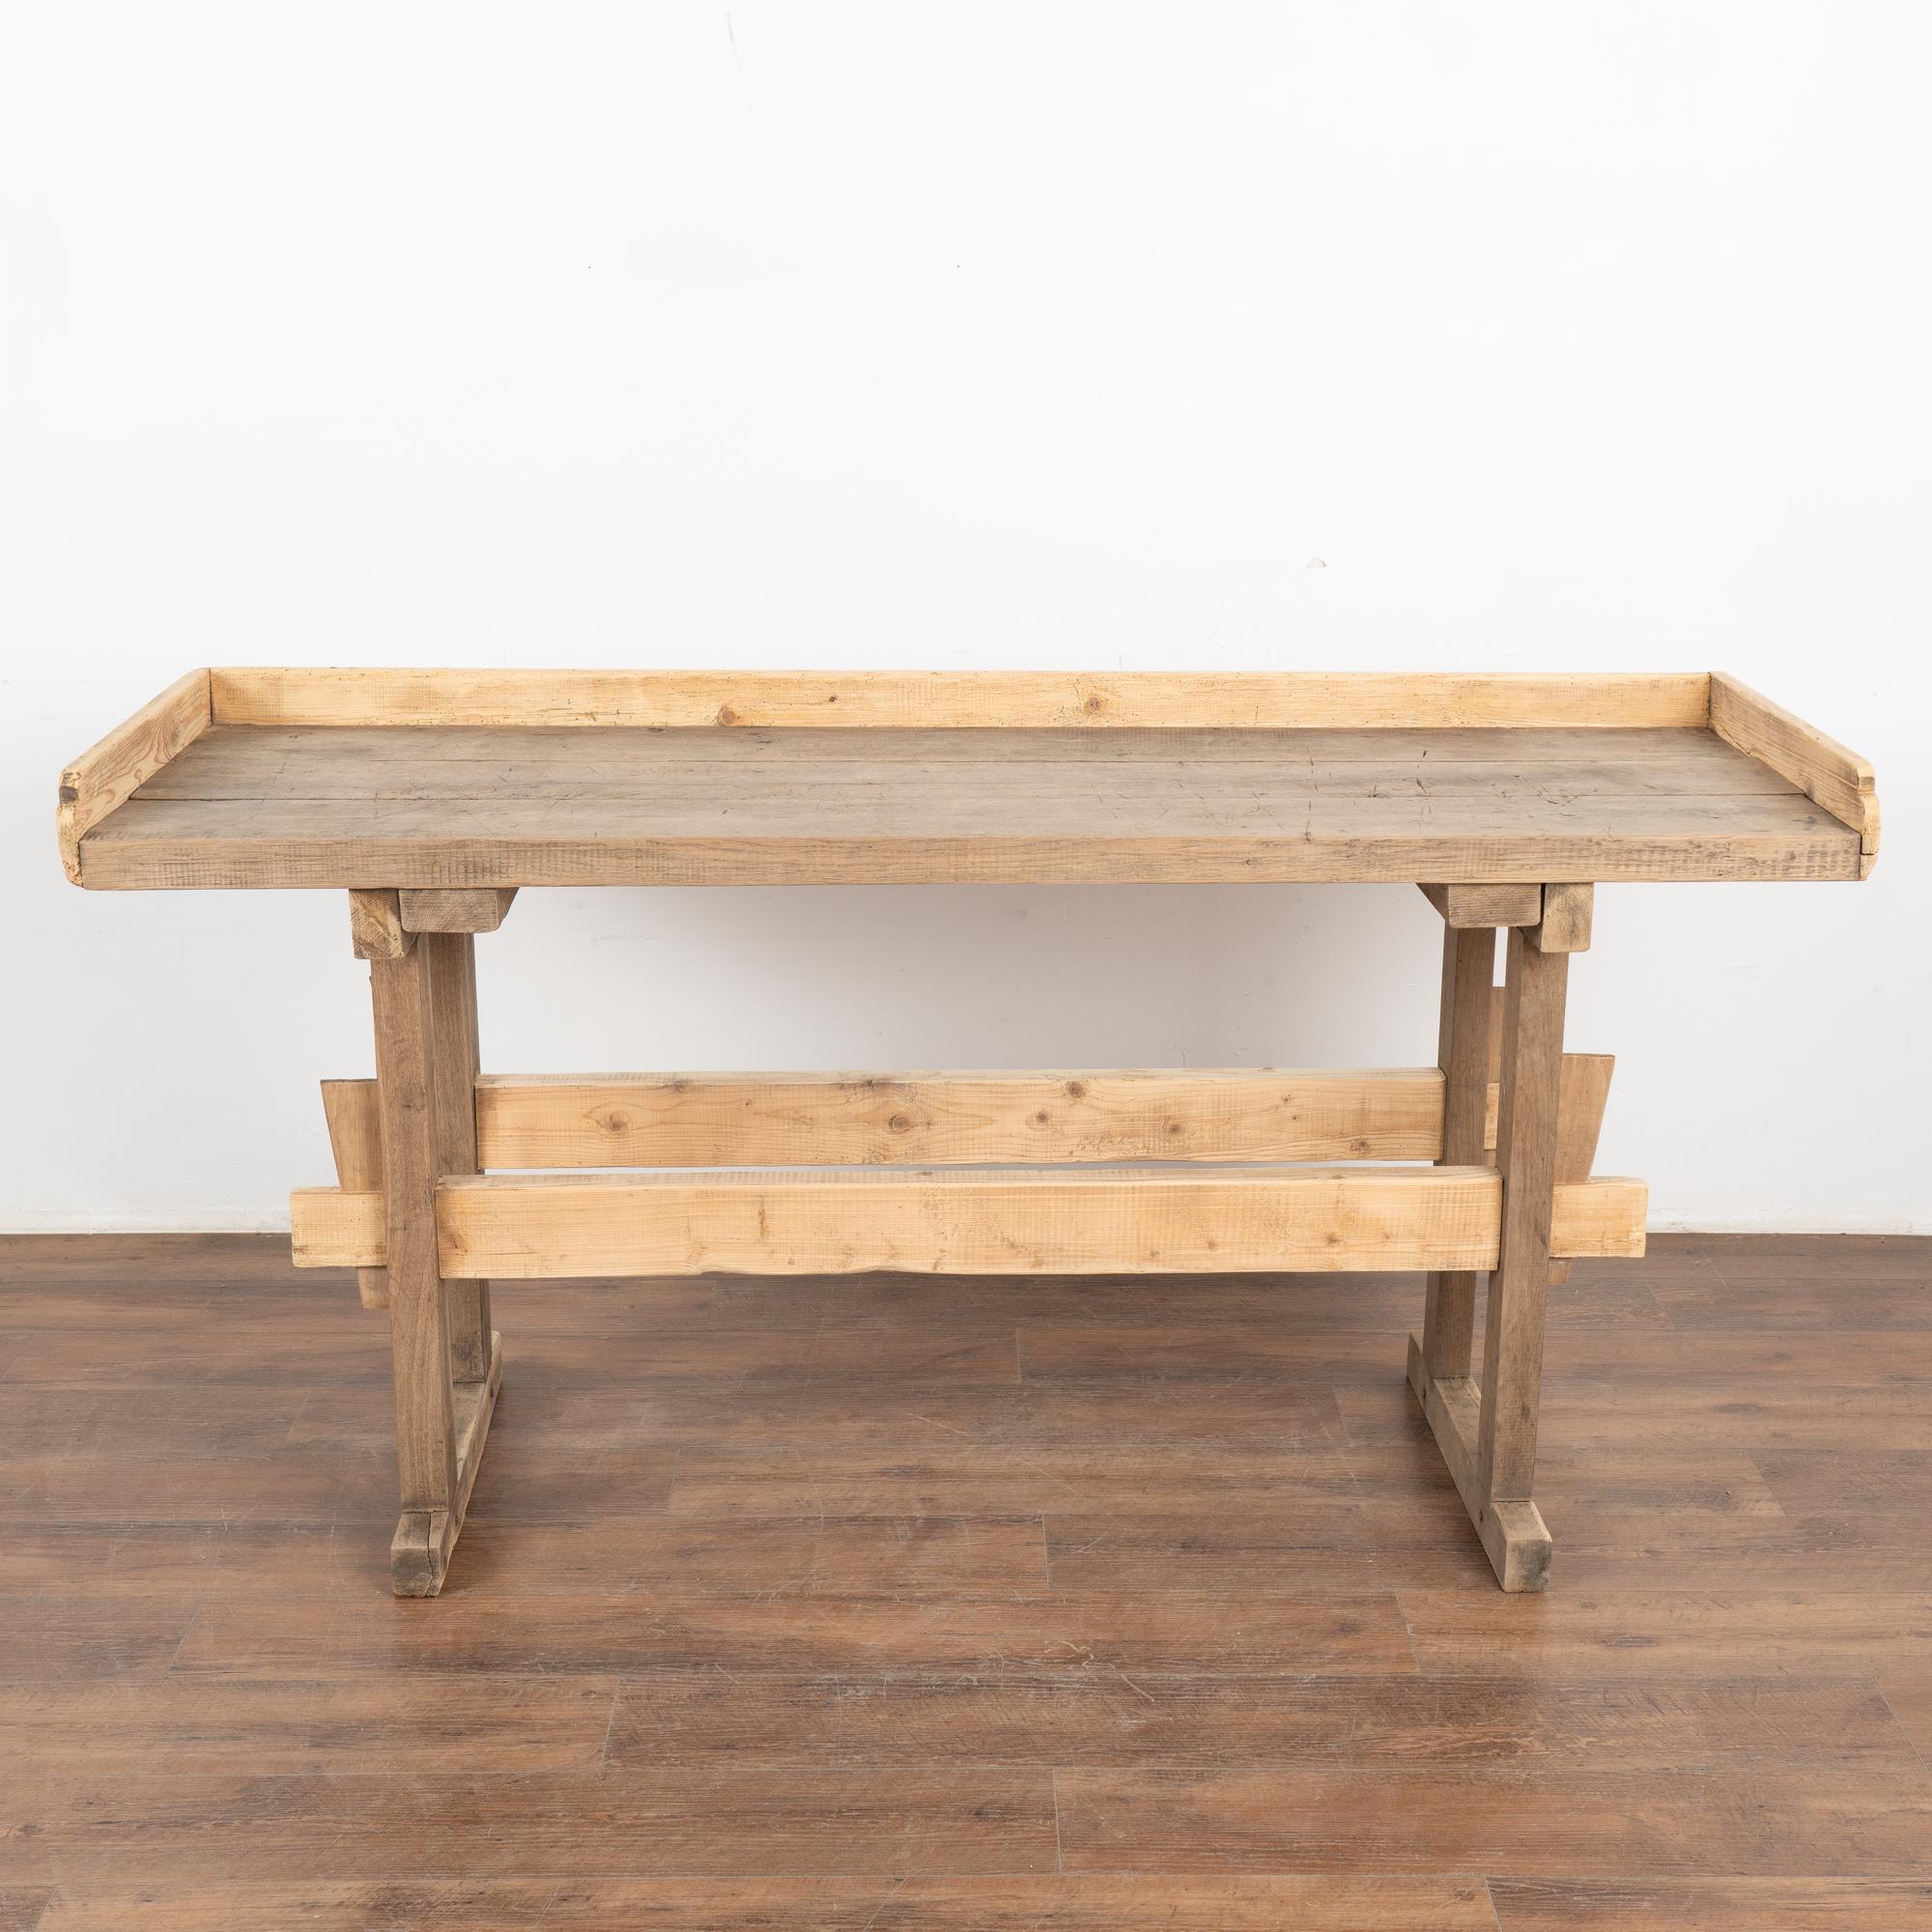 Rustic Work Table Console Table, circa 1880 from Hungary For Sale 1